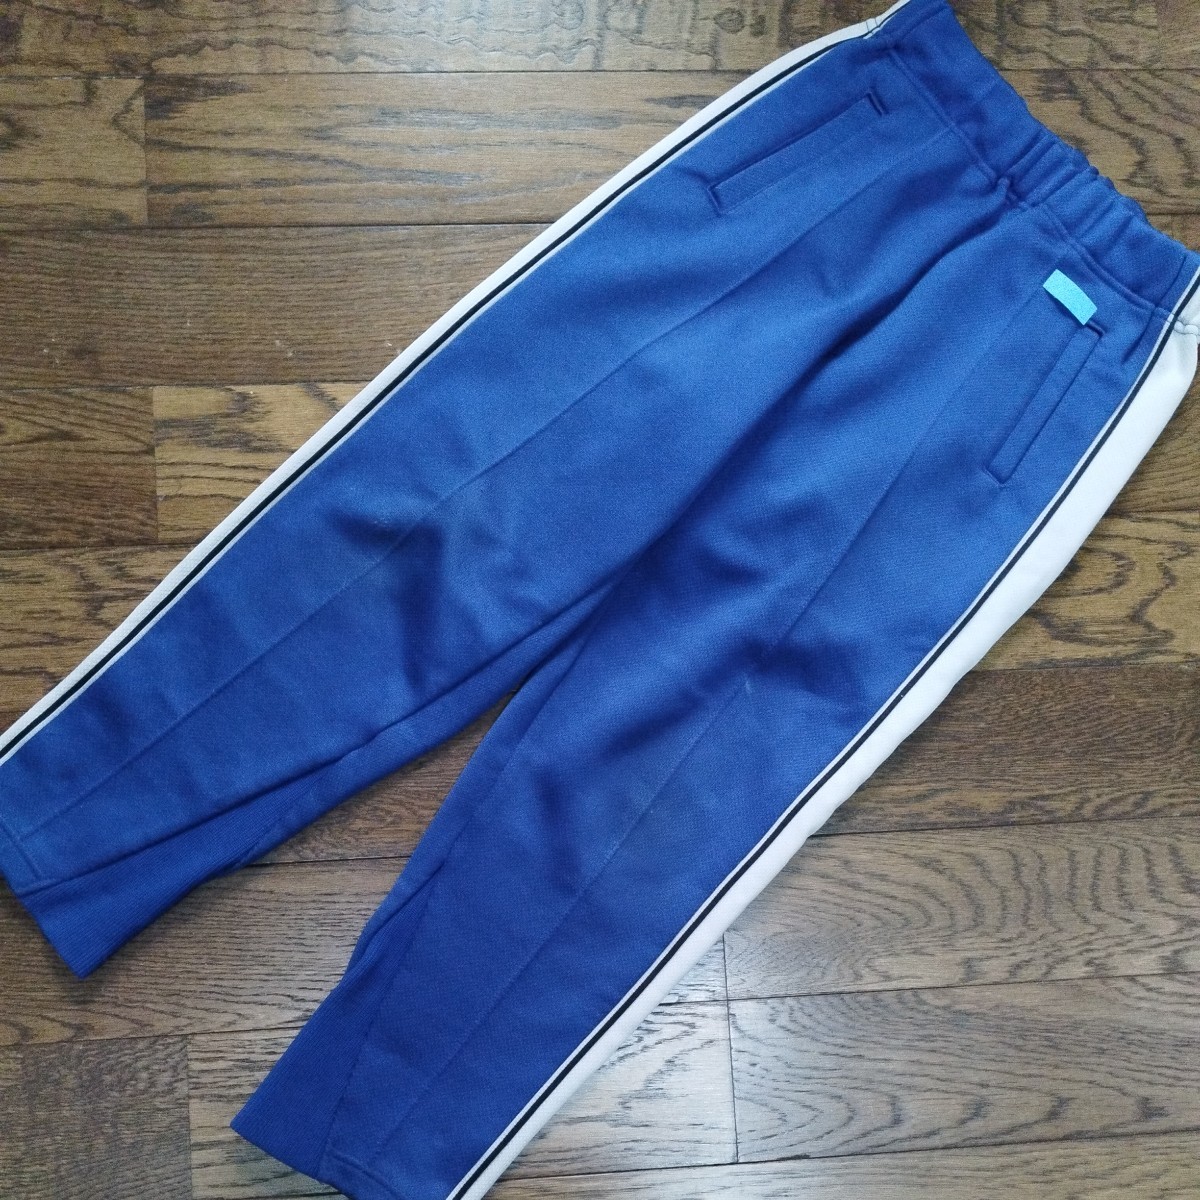 [2306] man and woman use *KANKO blue color sport long trousers / jersey / training wear 130cm